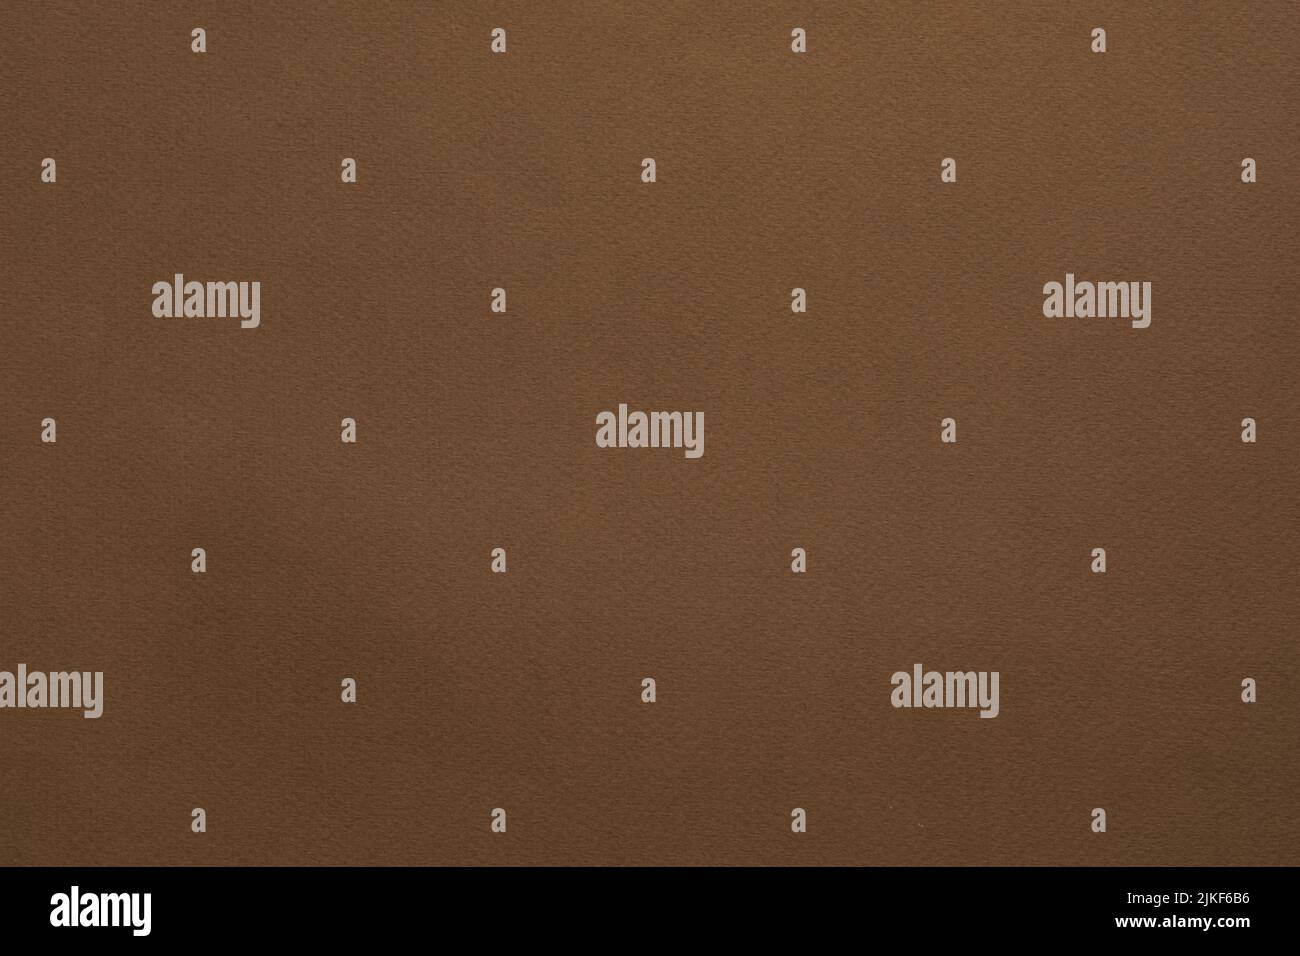 Brown Felt Texture Abstract Background Paper Stock Photo